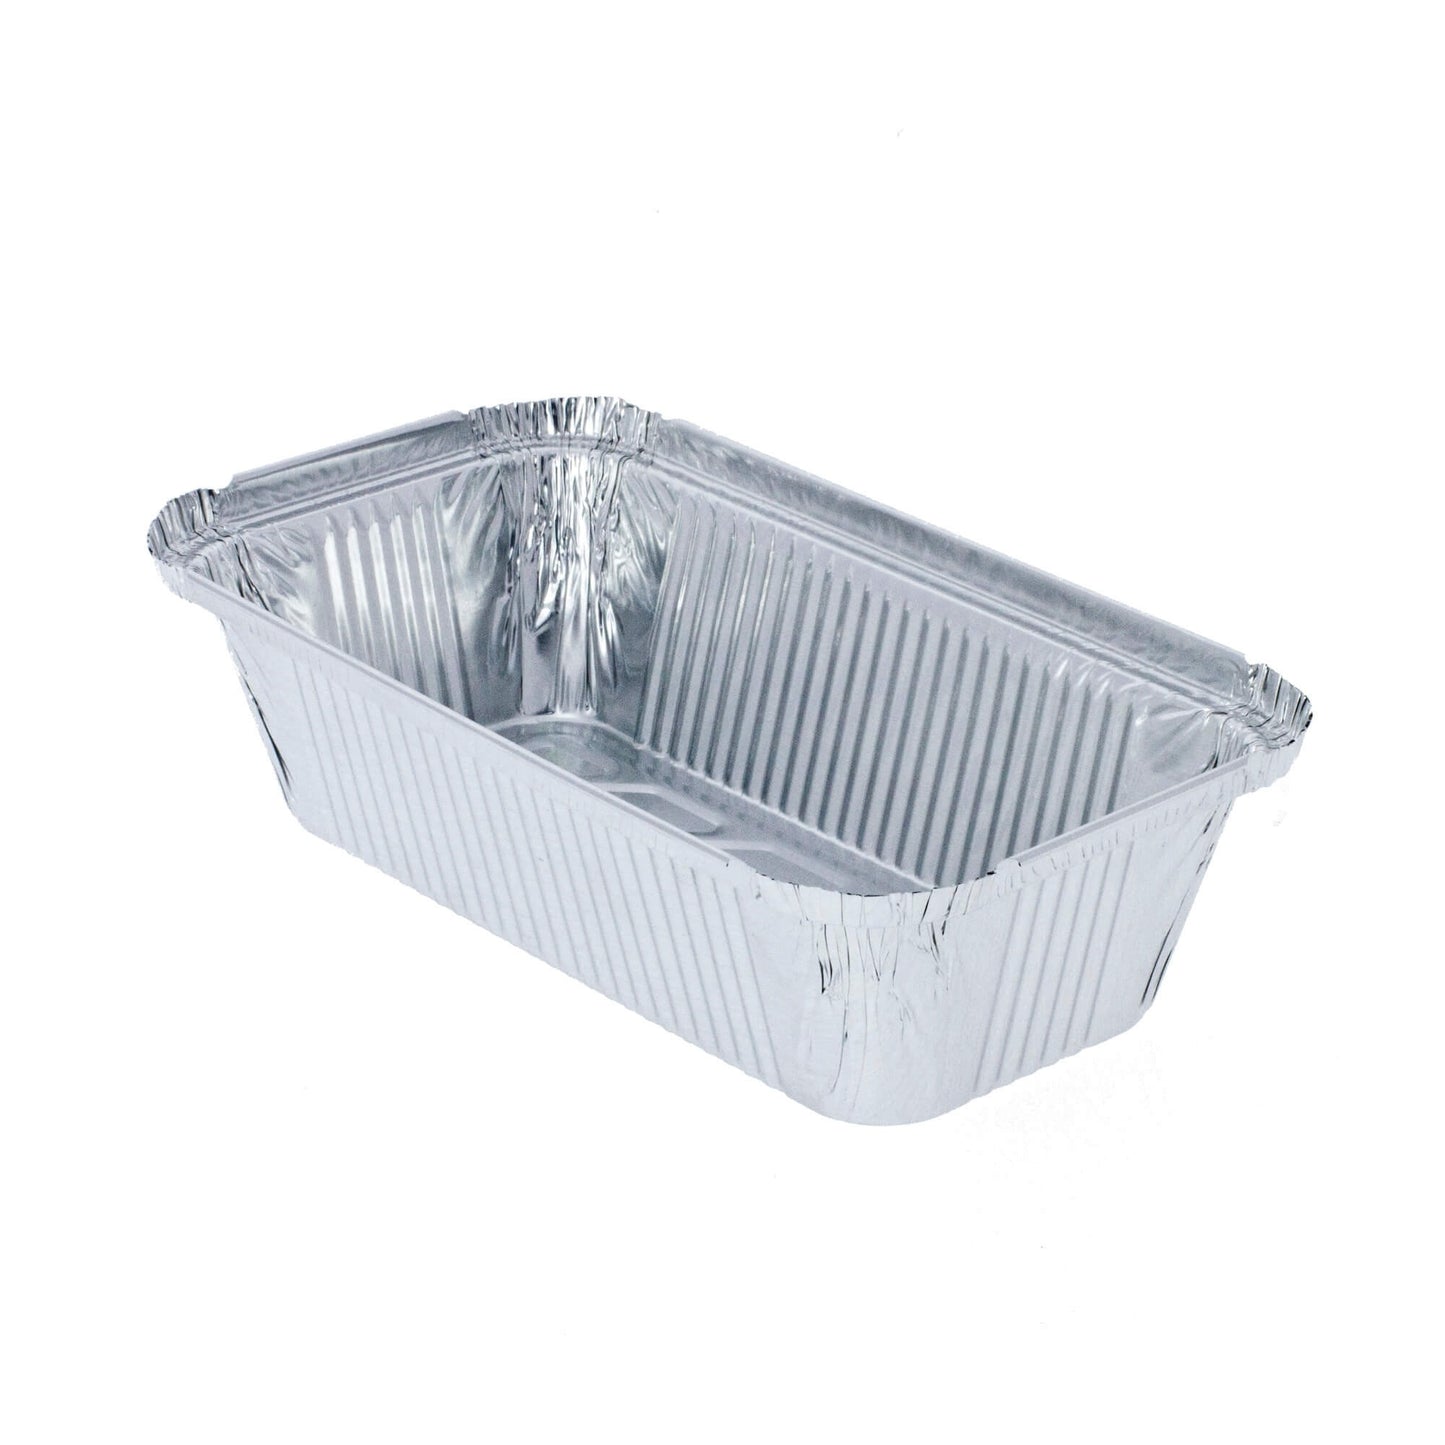 No. 6A Aluminium Foil Food Containers Recyclable 500pk (Large)